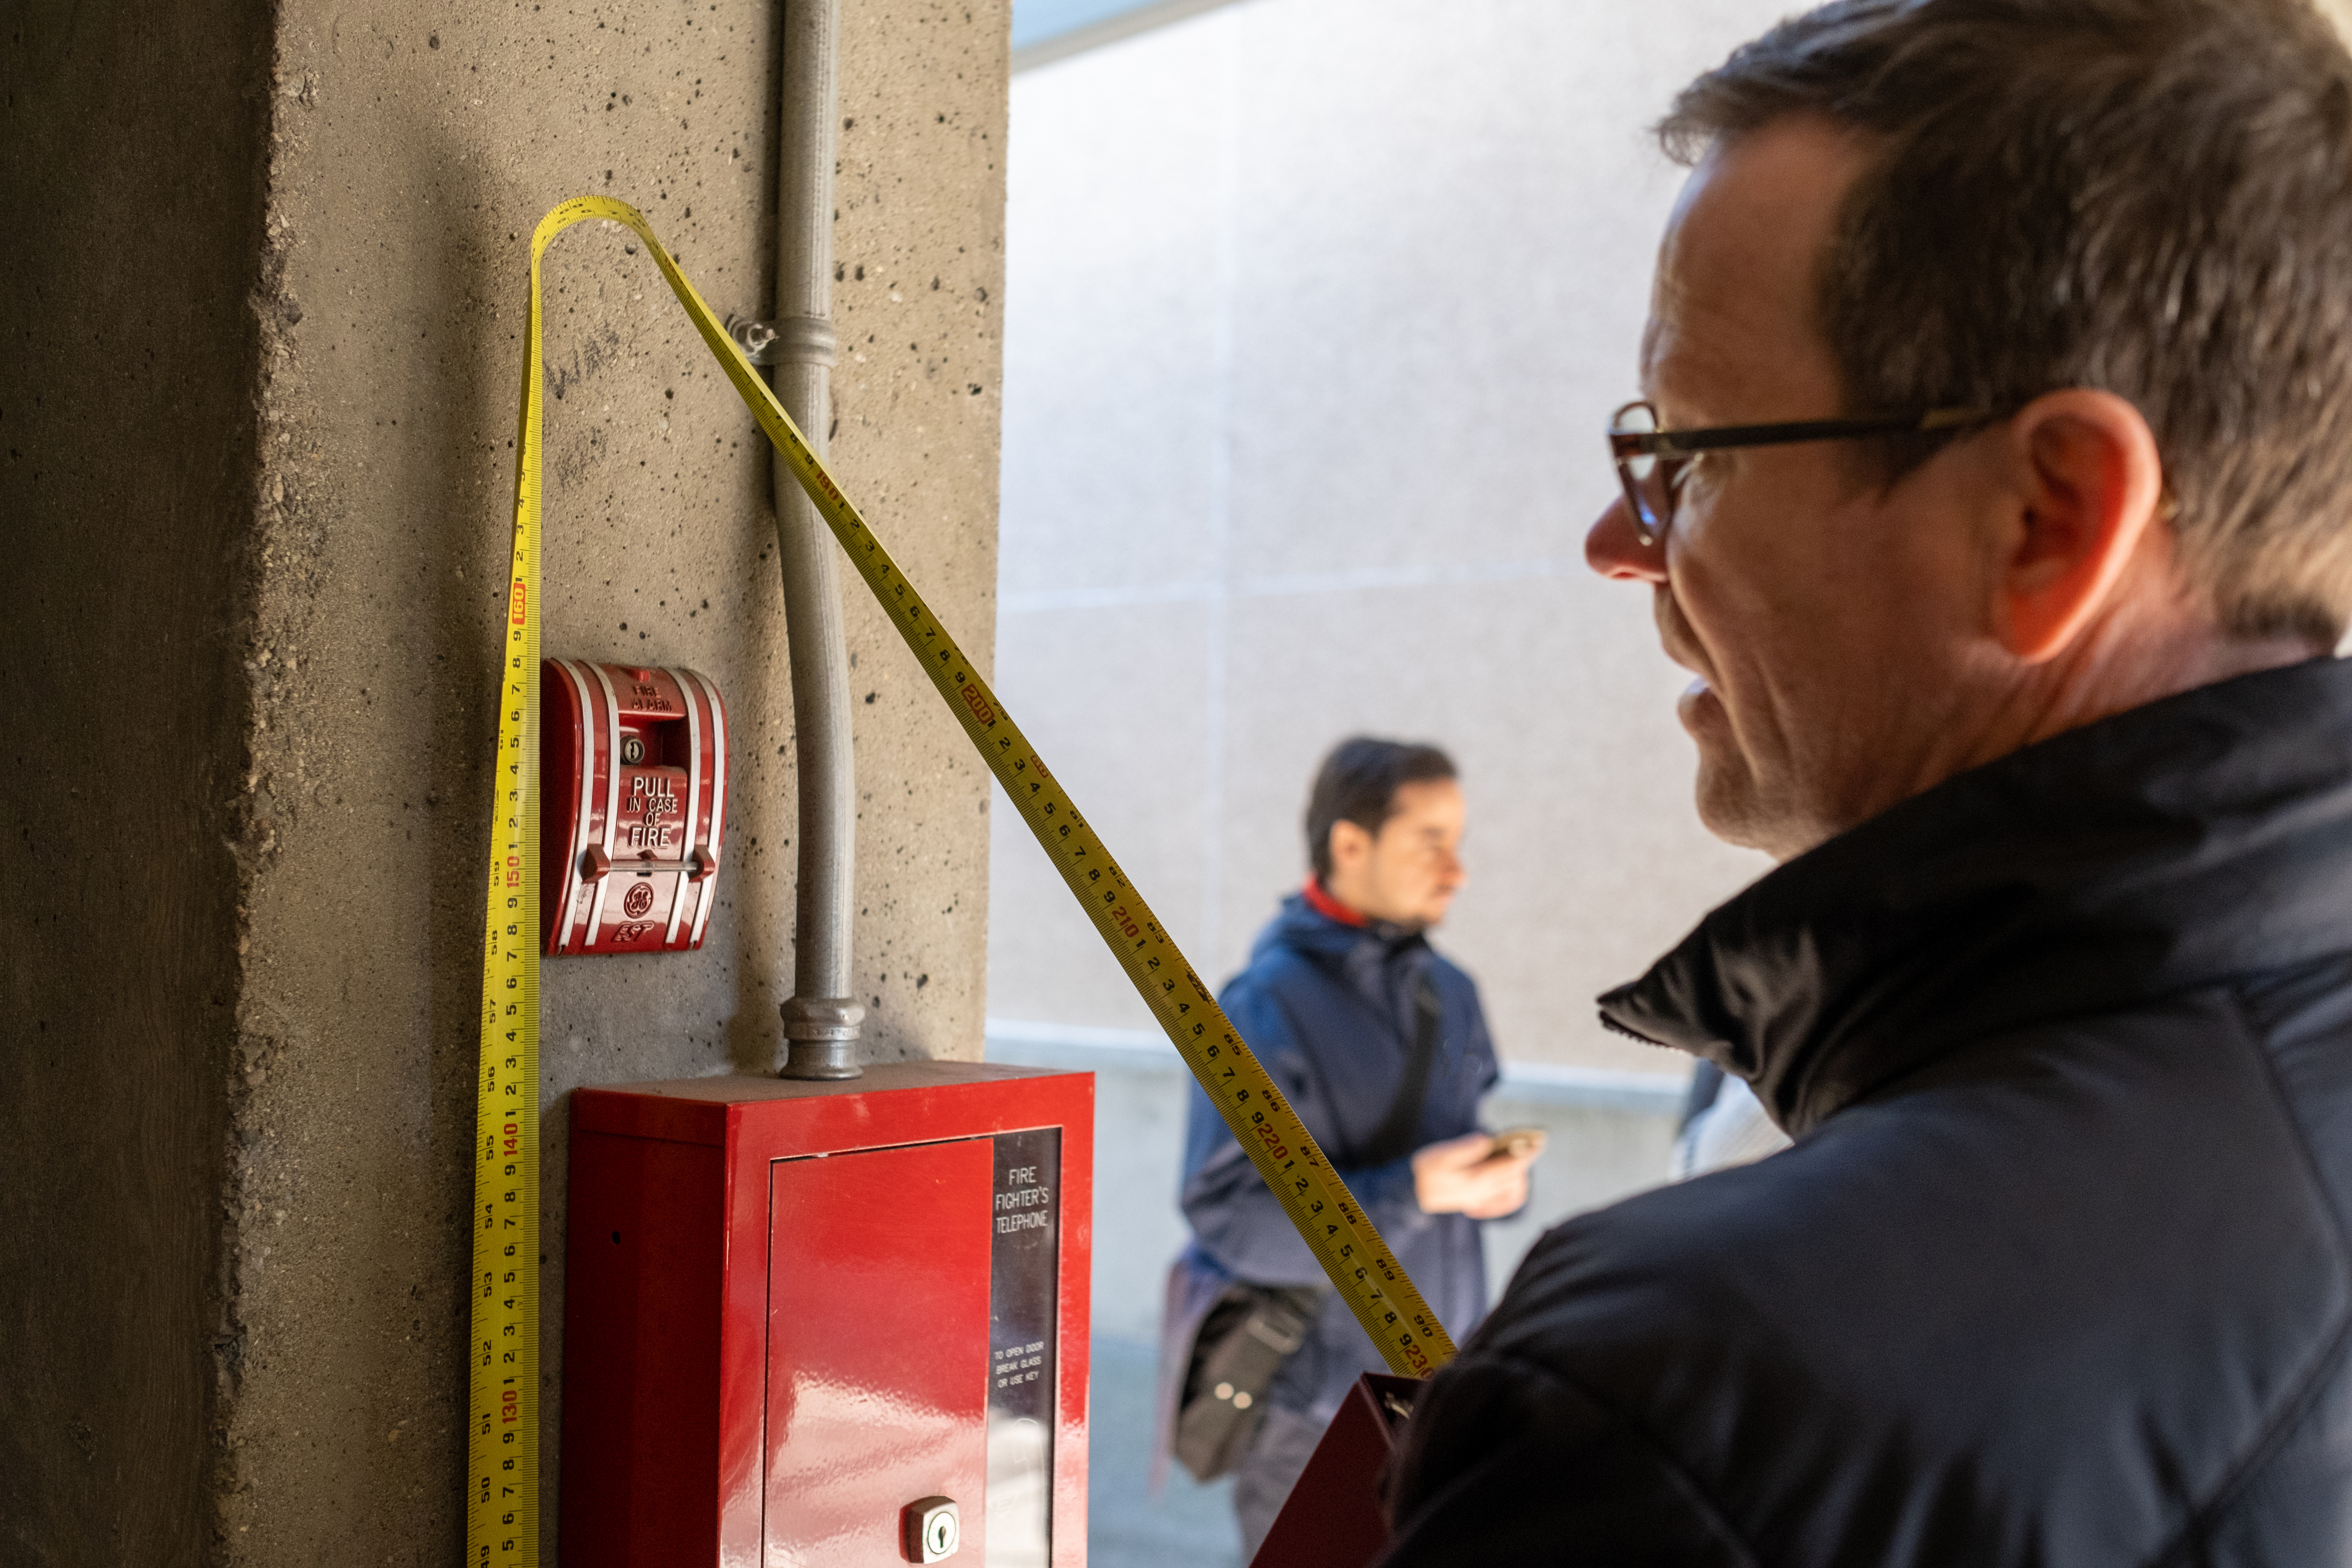 RHFAC Professional measuring a fire alarm mounted on a wall 